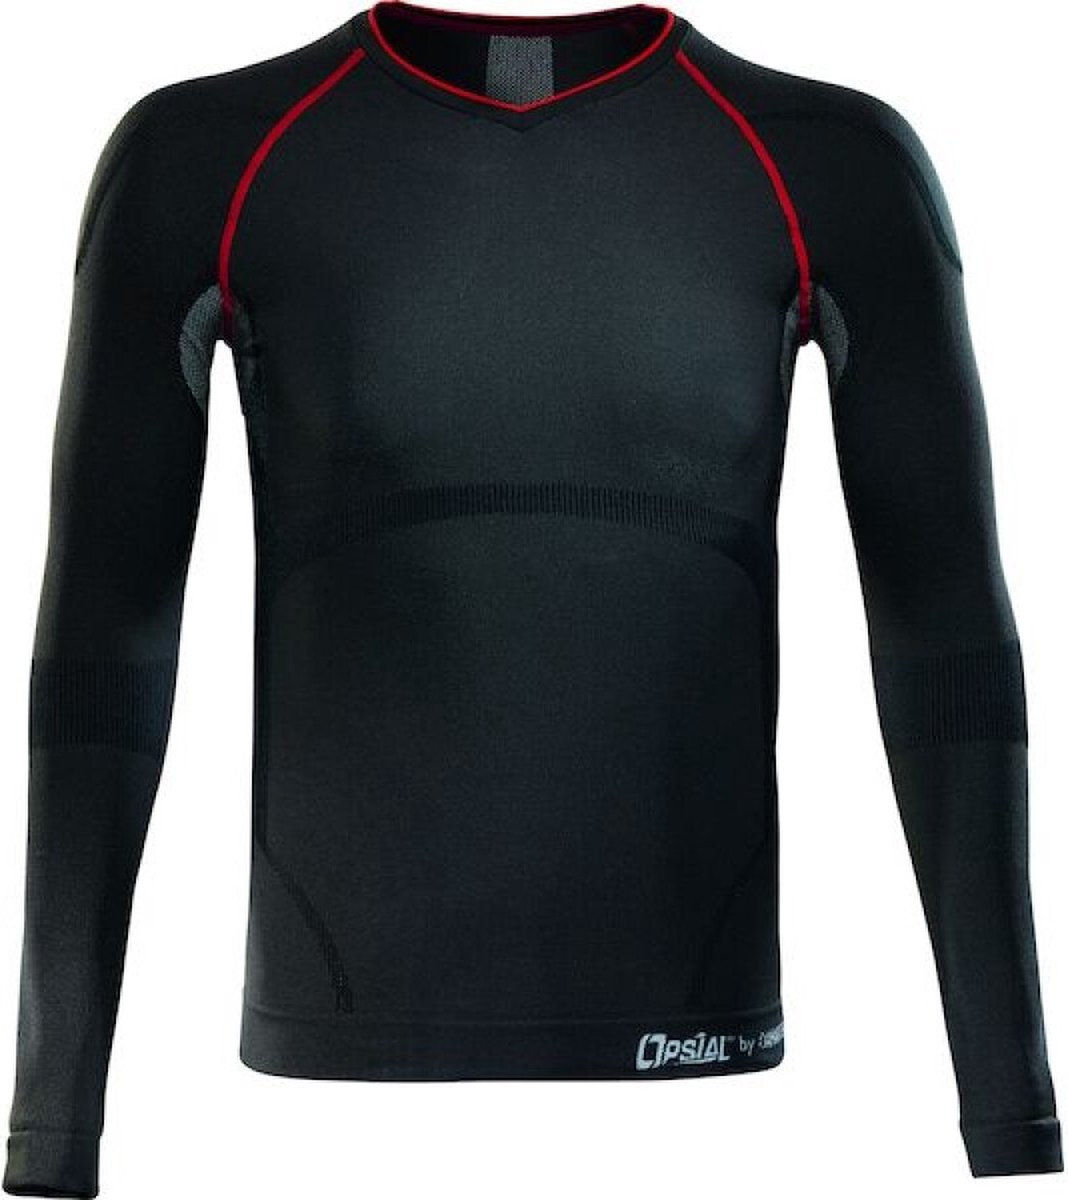 Opsial thermo shirt - Helmer - grijs - maat S-M